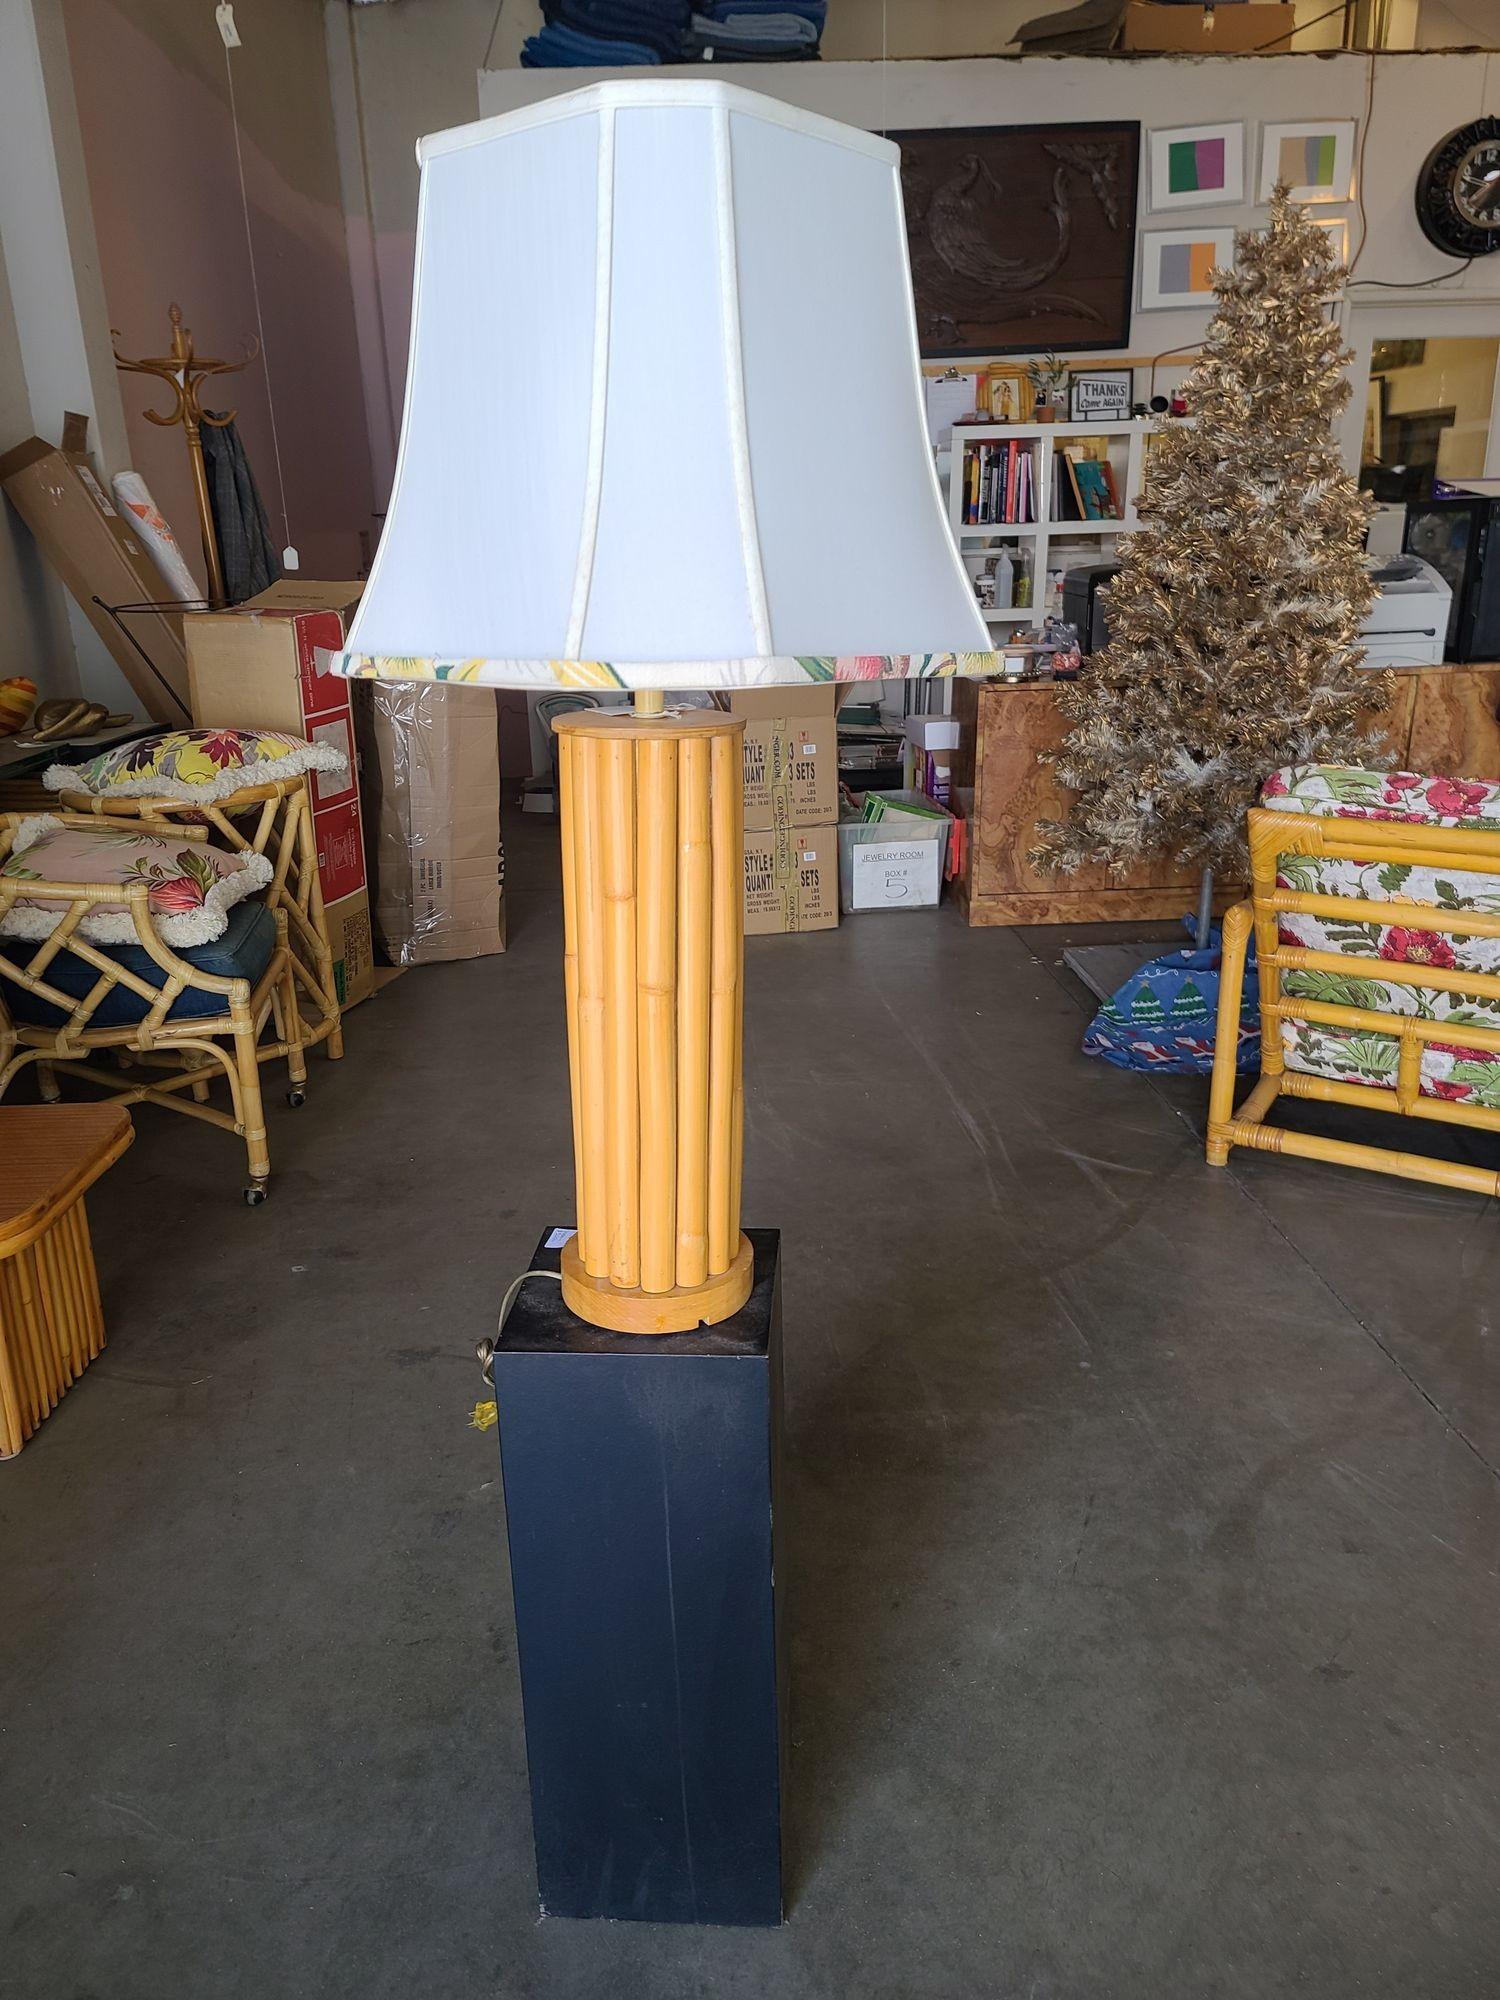 Restored mid-century rattan table lamp featuring 14 vertically stacked rattan poles fixed between two bleach blond teak caps with a brass 120 US socket.

The lamp comes with a white fabric shade featuring a tropical pattern fabric along the bottom